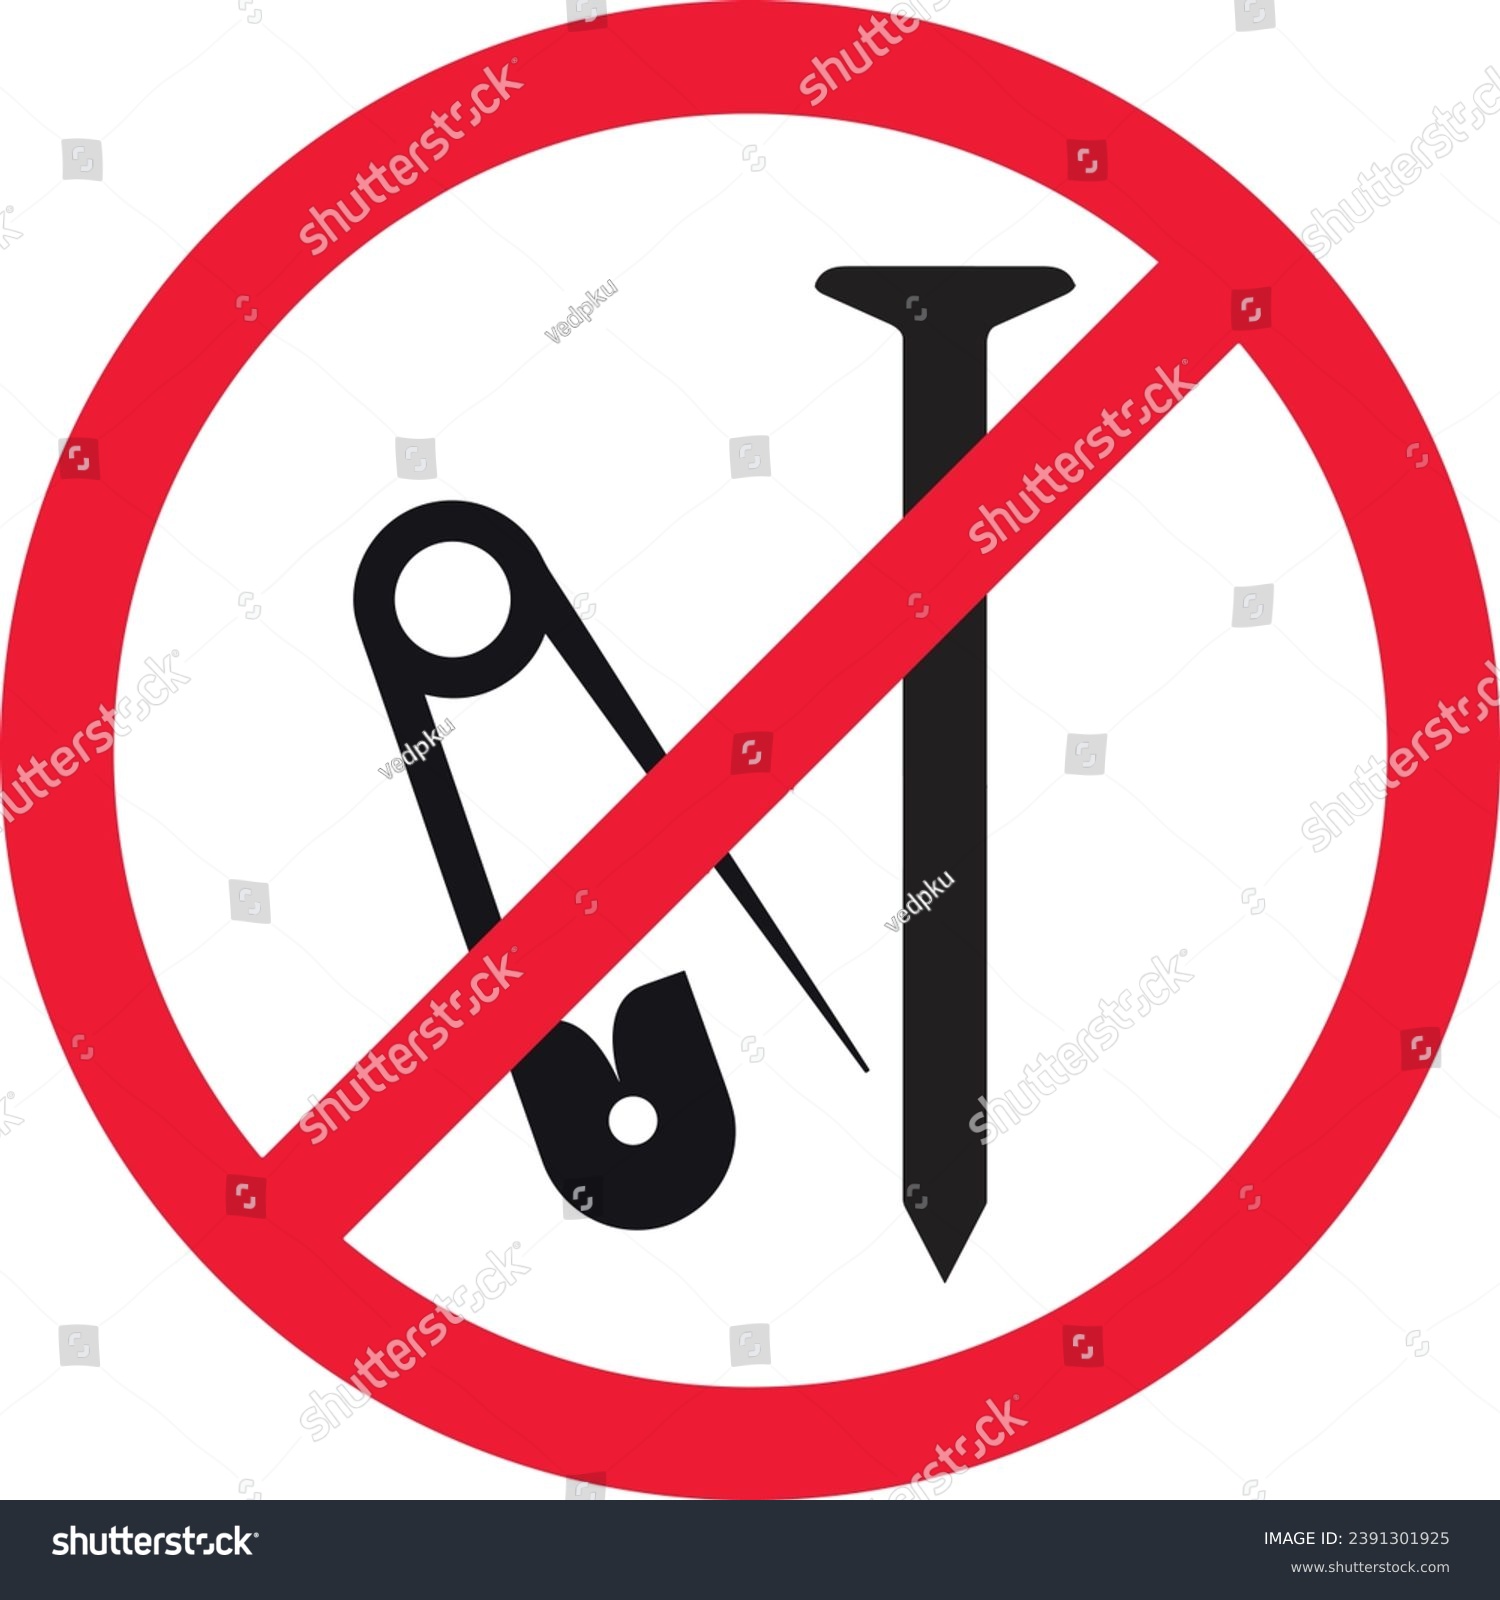 SVG of 
Metal Nail not allowed | No Safety pin | Sharp Object not allowed | prohibition signs metal nails and safety pin svg